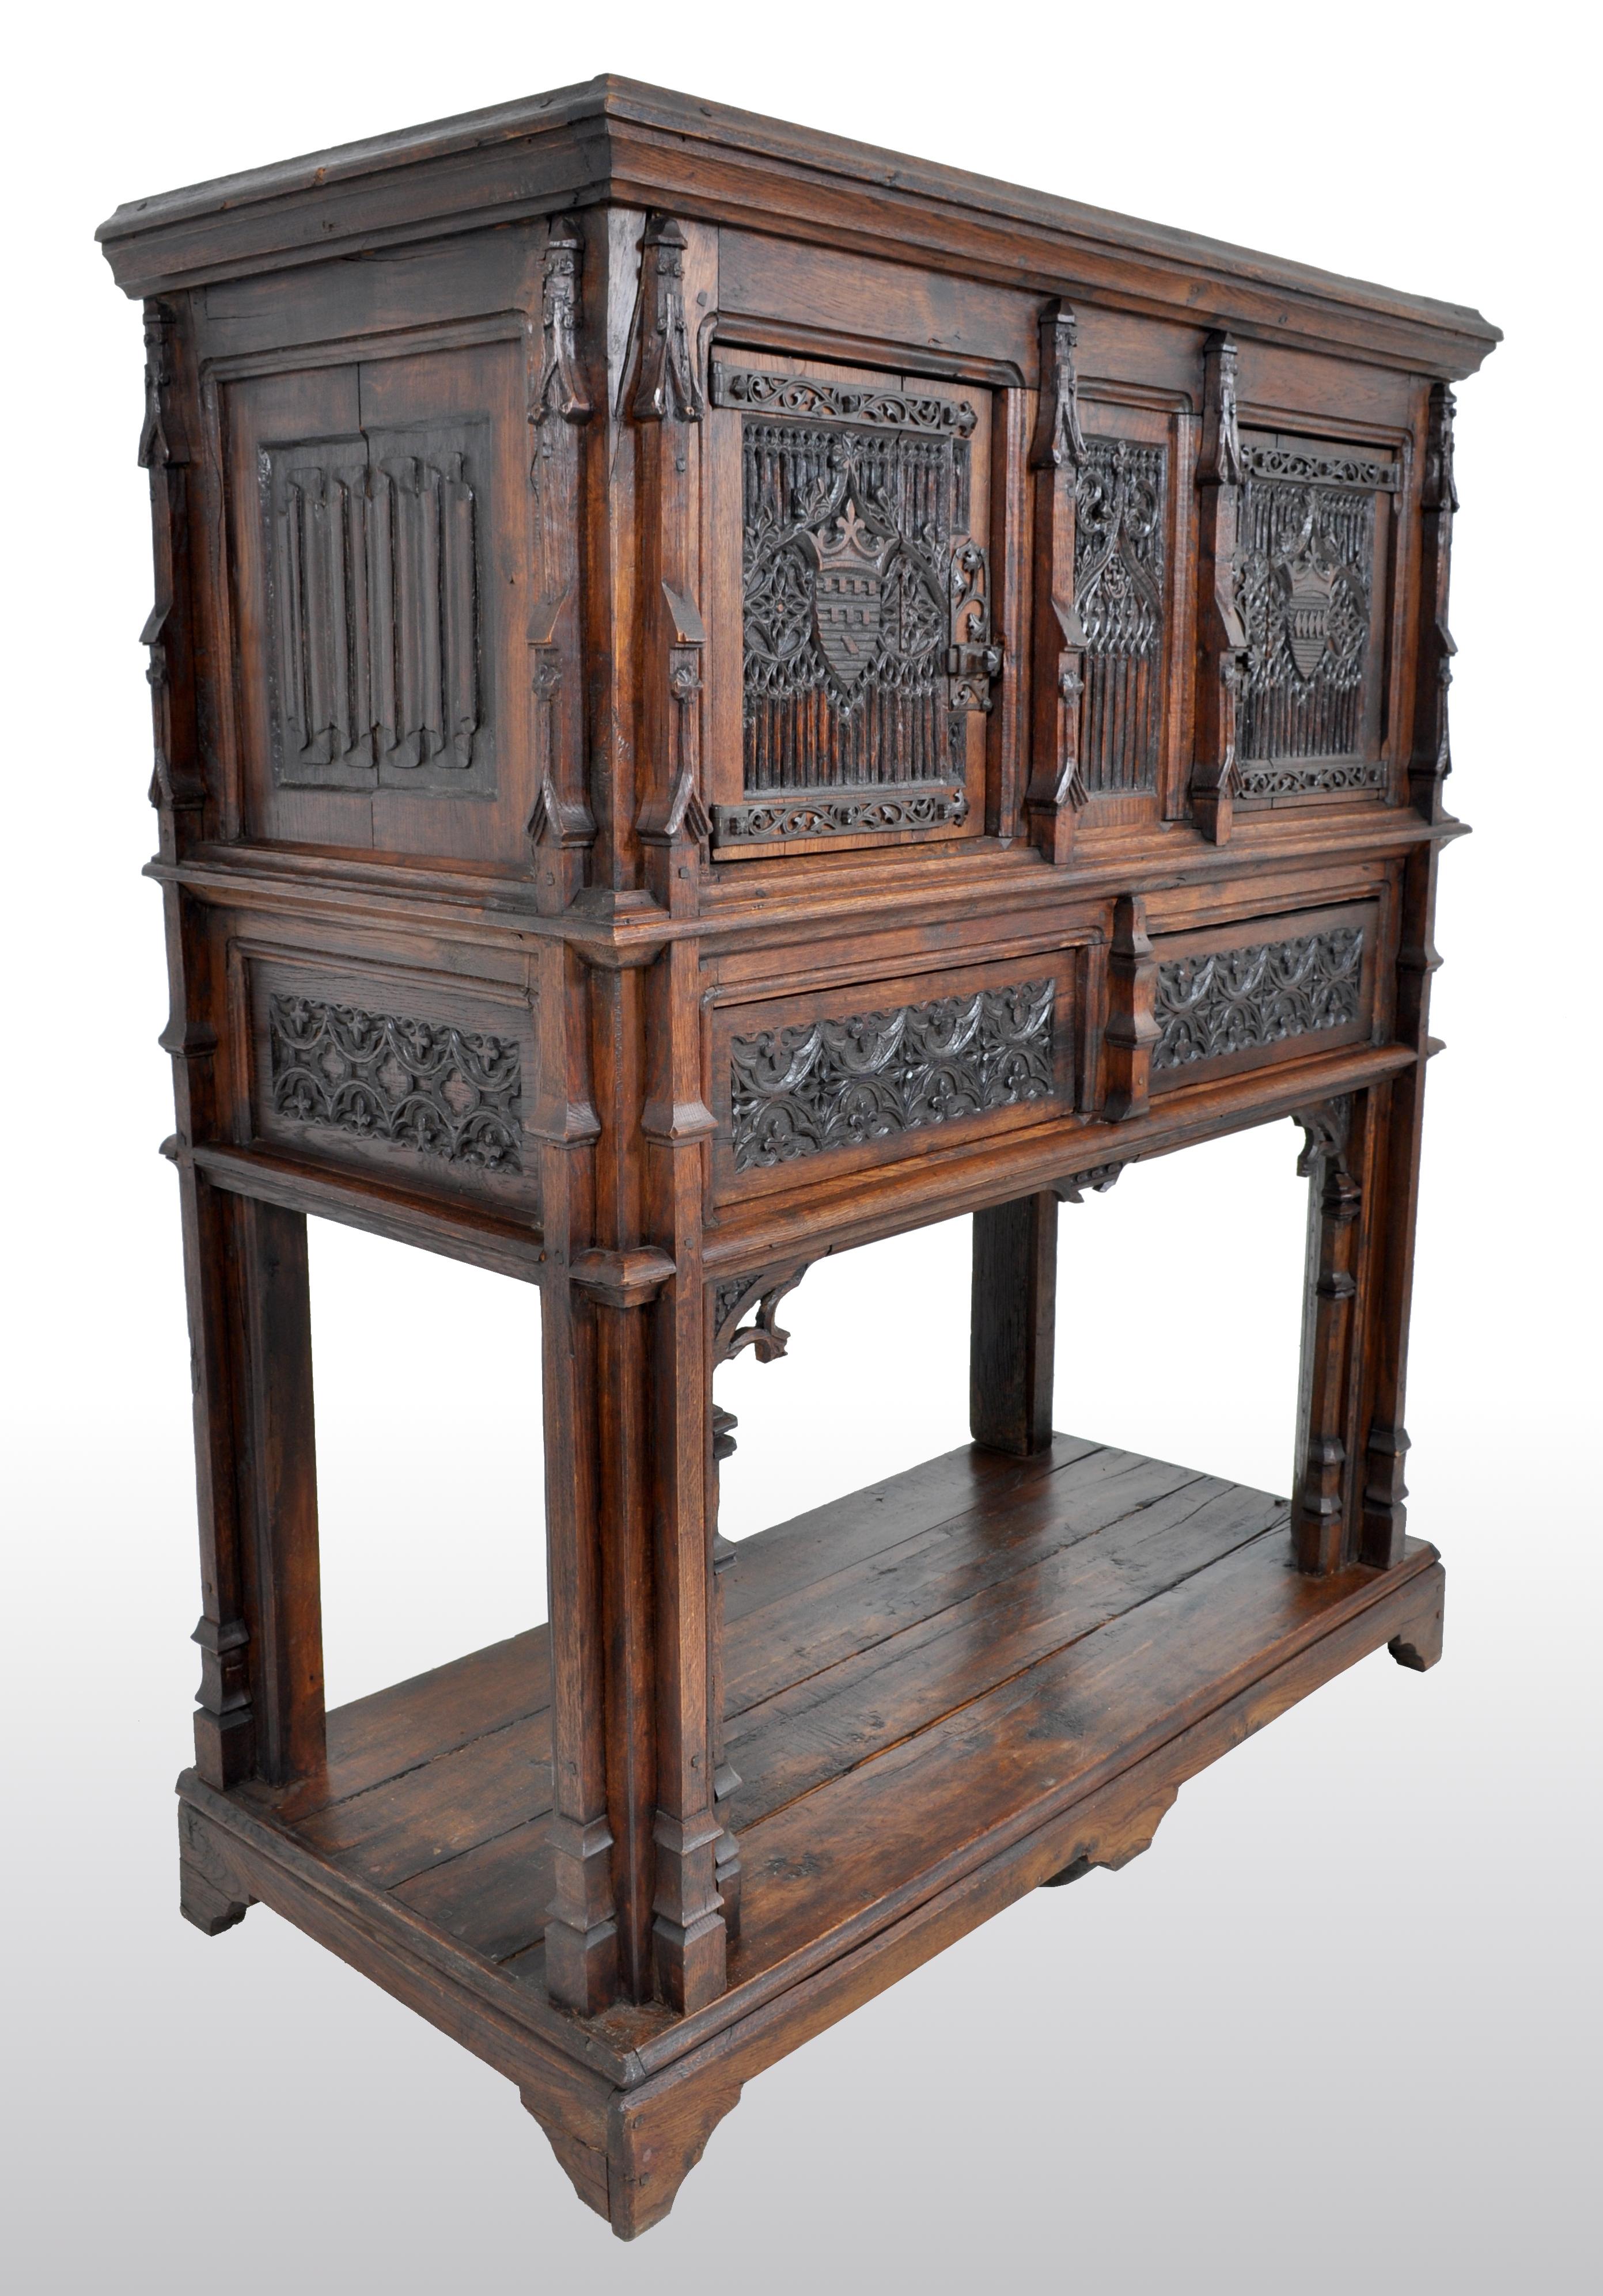 Antique French Gothic oak chalice court / cabinet / sideboard, circa 1860. The cabinet in two sections, having Gothic pinnacles on the sides and front, the front having two cupboard doors and a central panel with linen-fold carving, quatrefoils, and